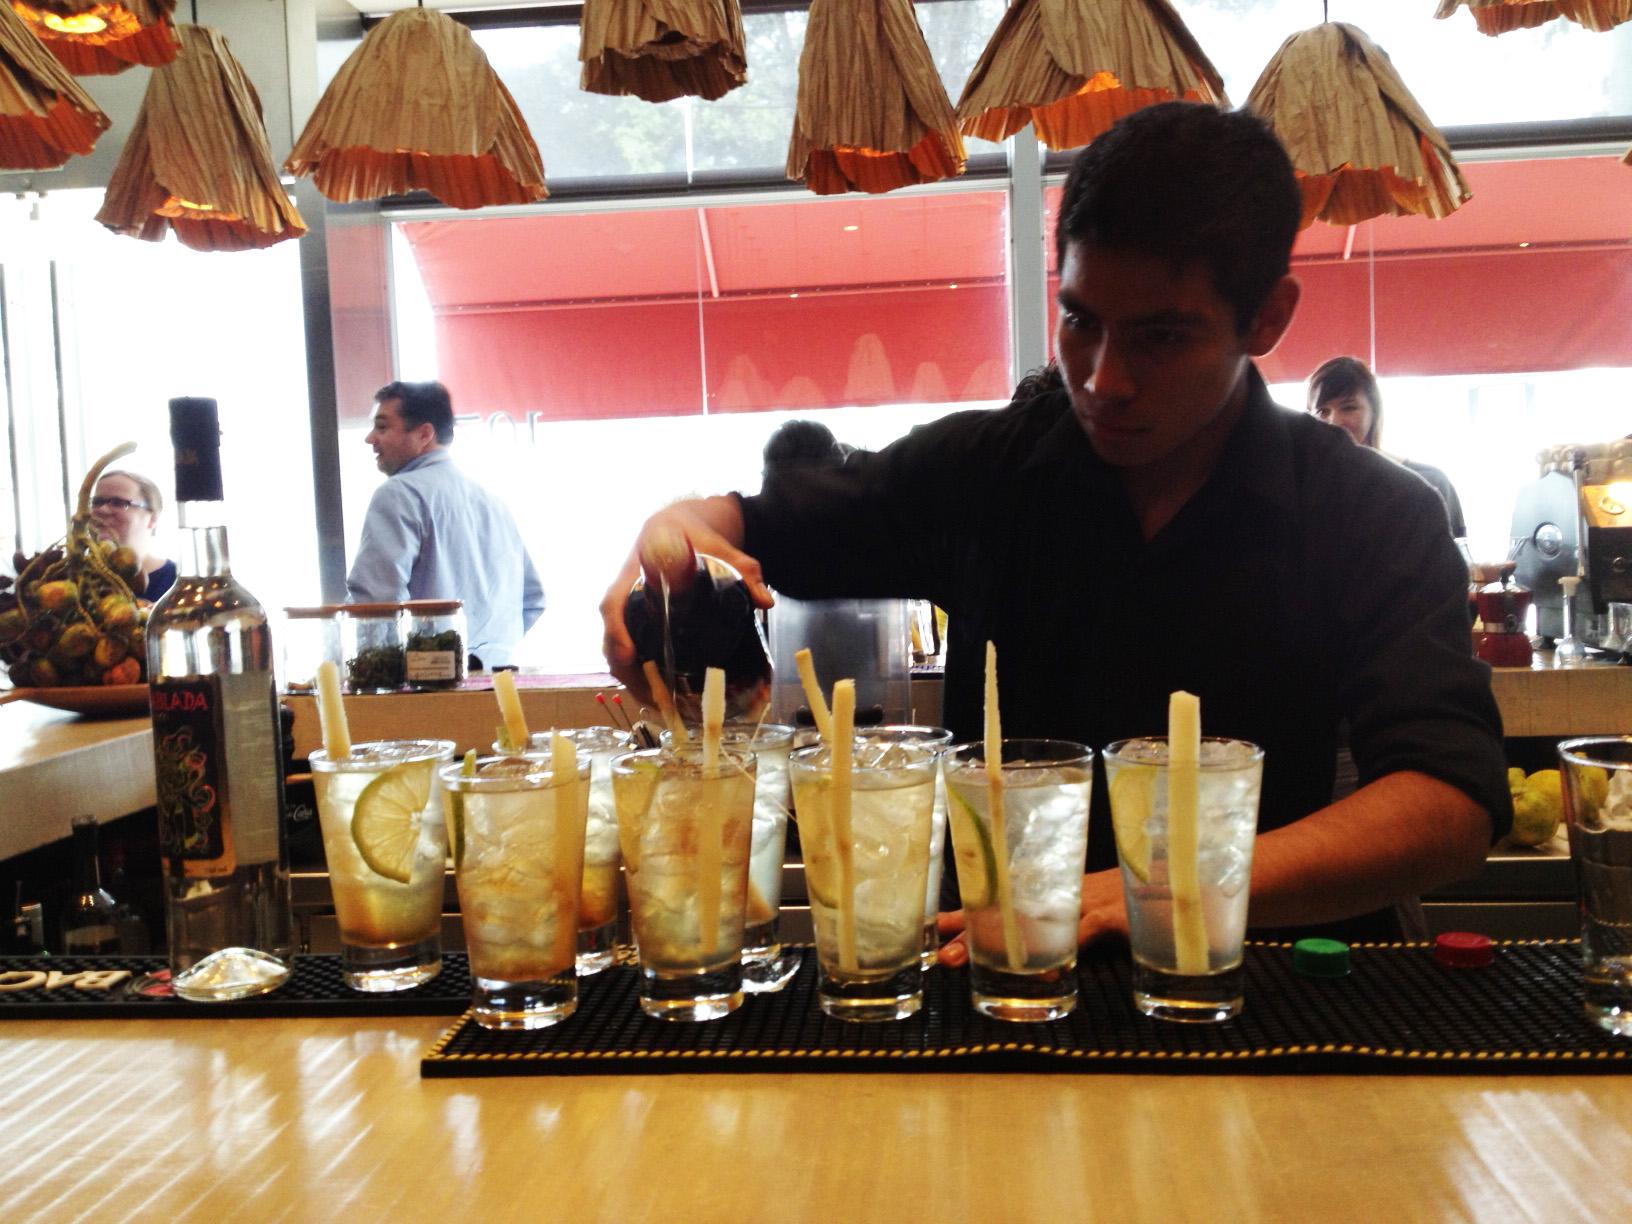 A bartender at a Lima restaurant whips up one of Peru's signature pisco cocktails